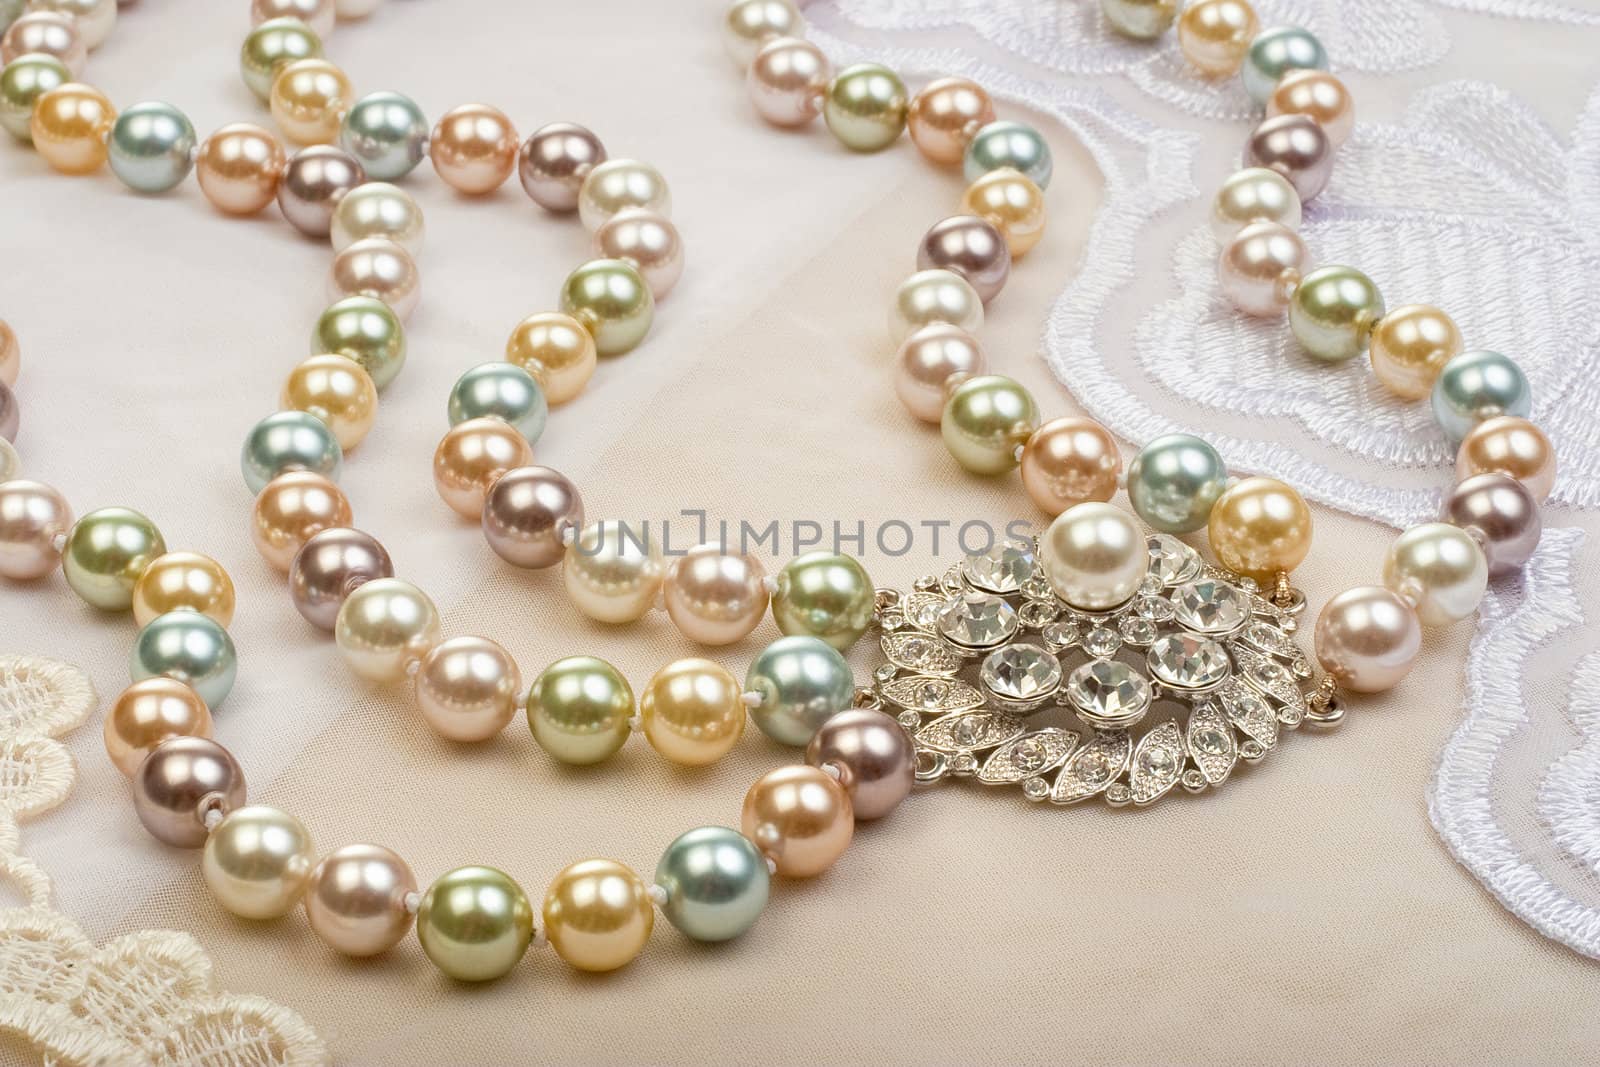 Necklace on lace background closeup